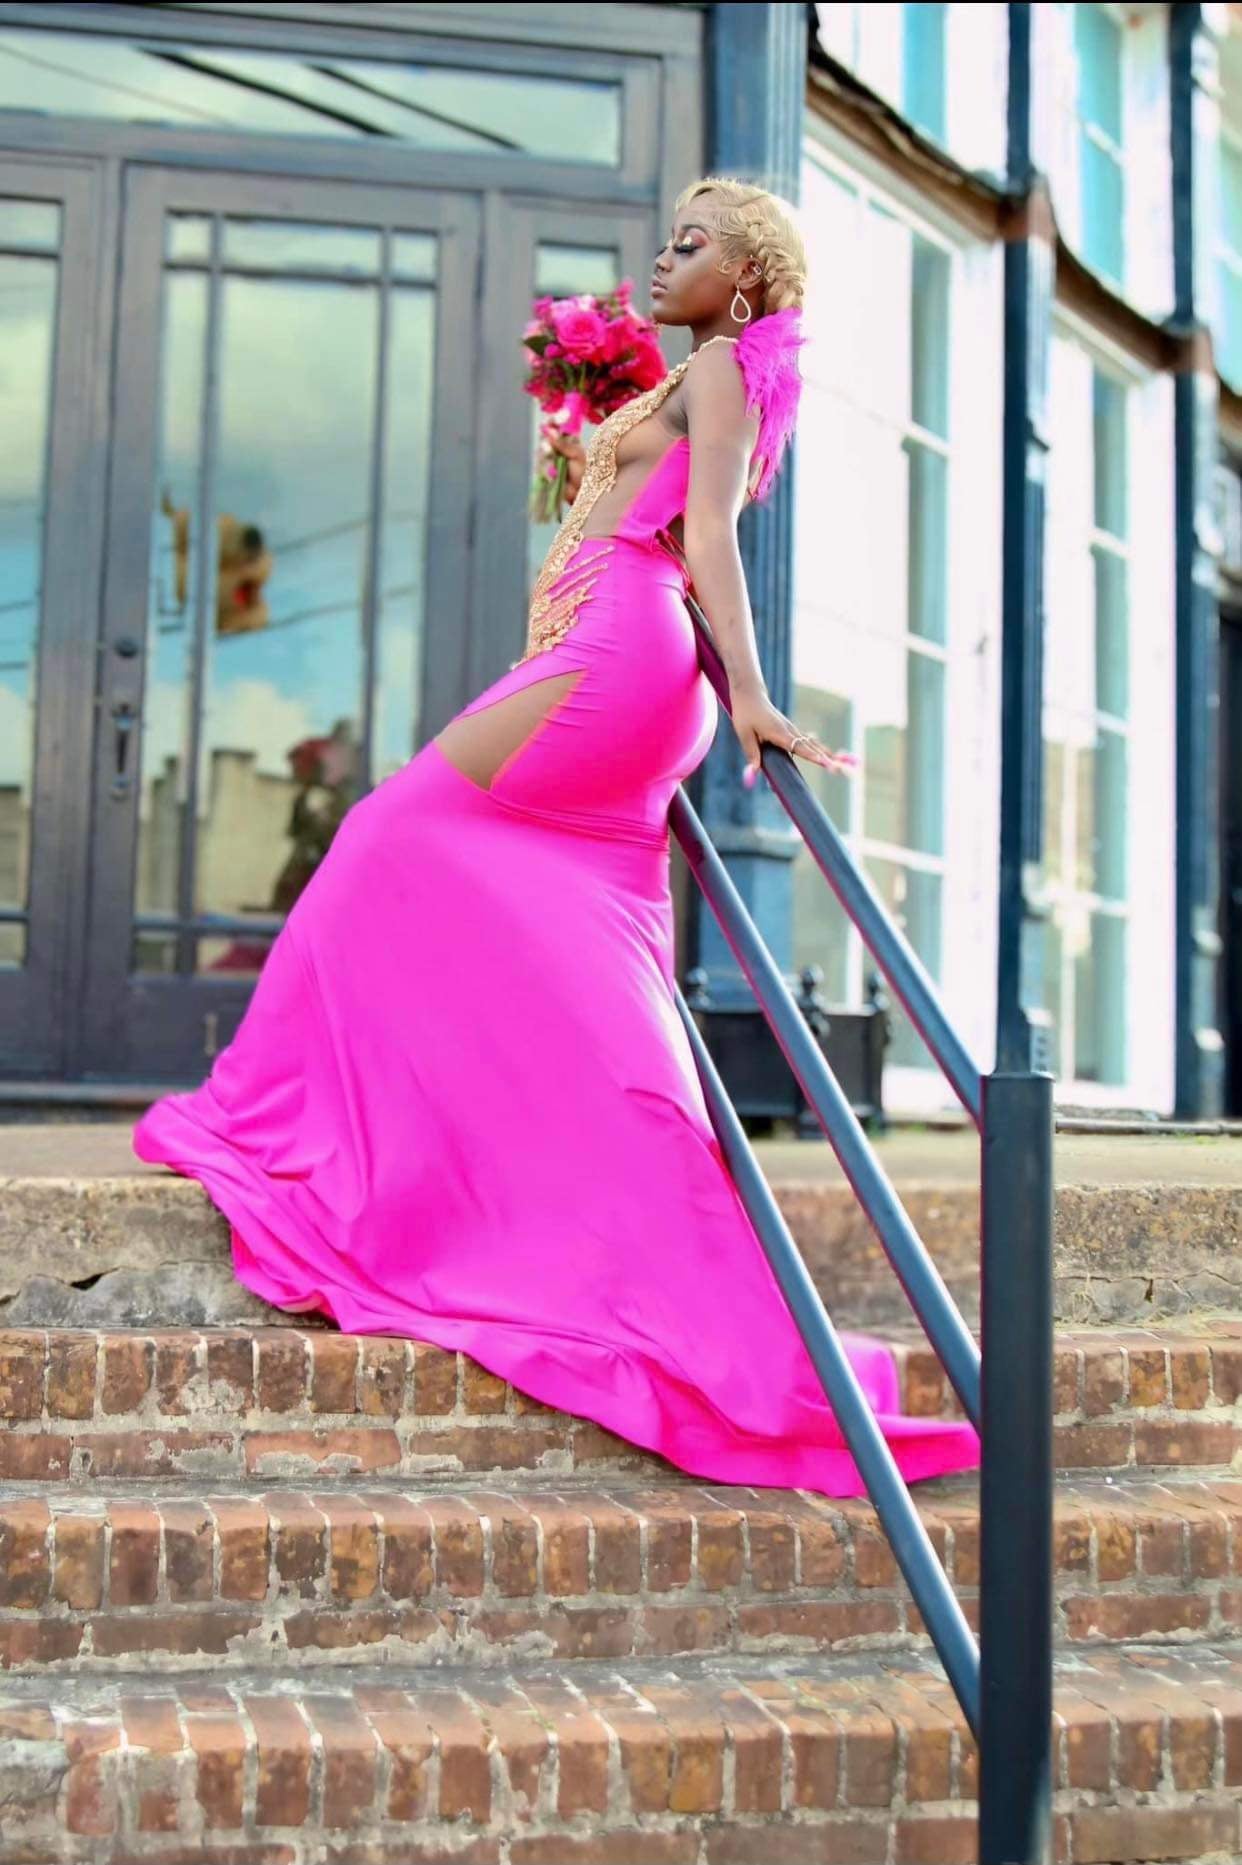 Hot Pink Prom Gown (Mermaid)